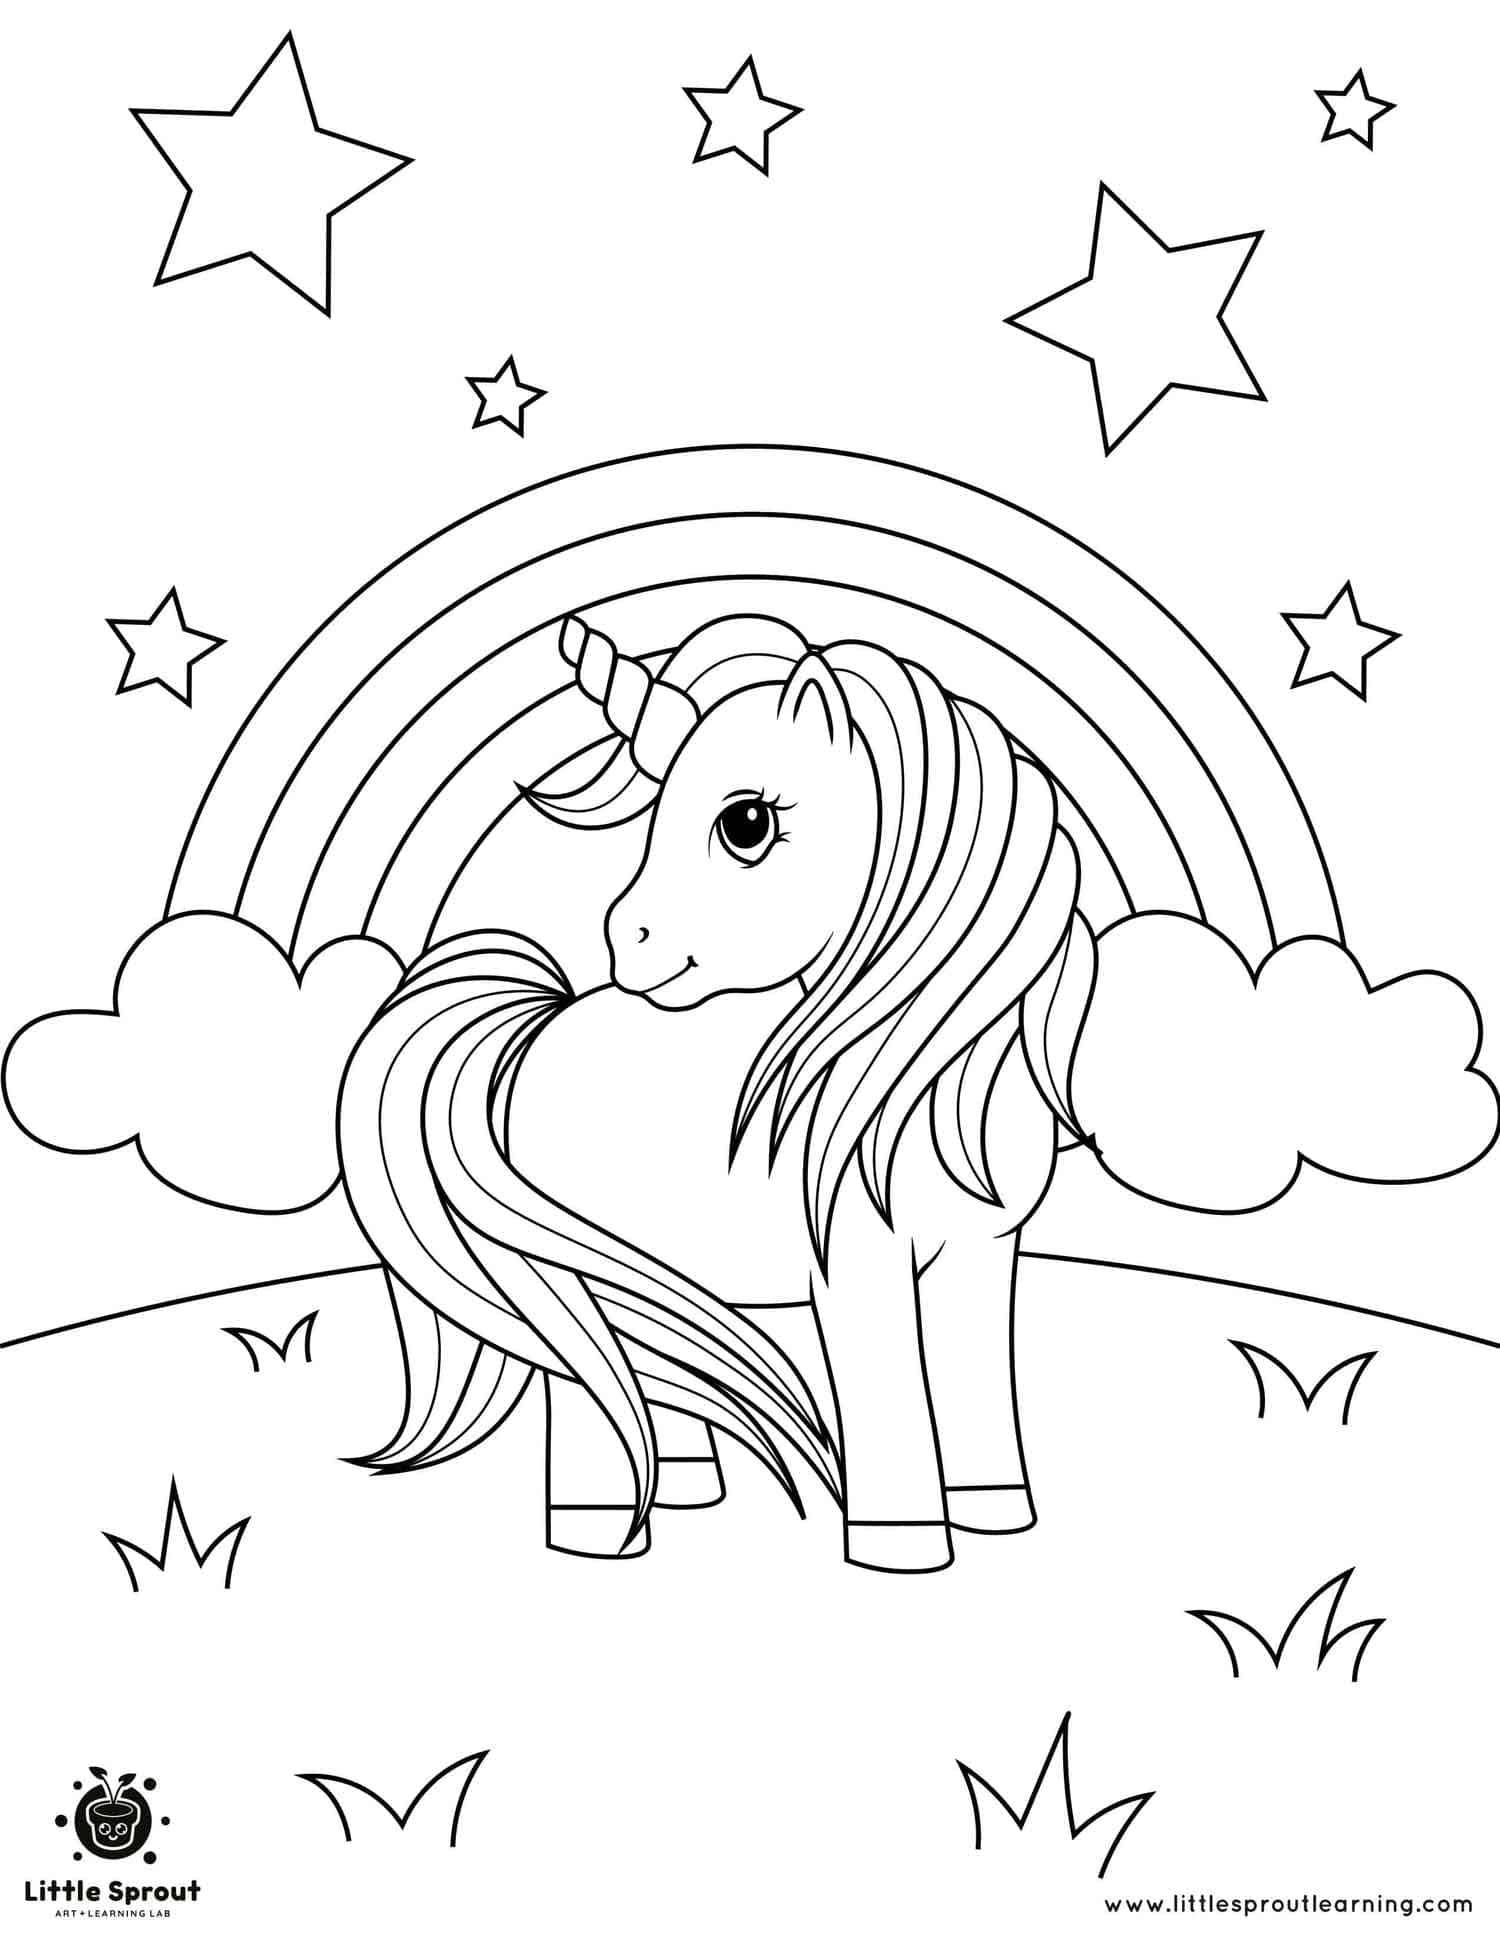 Rainbow, Stars and a Unicorn Coloring Page